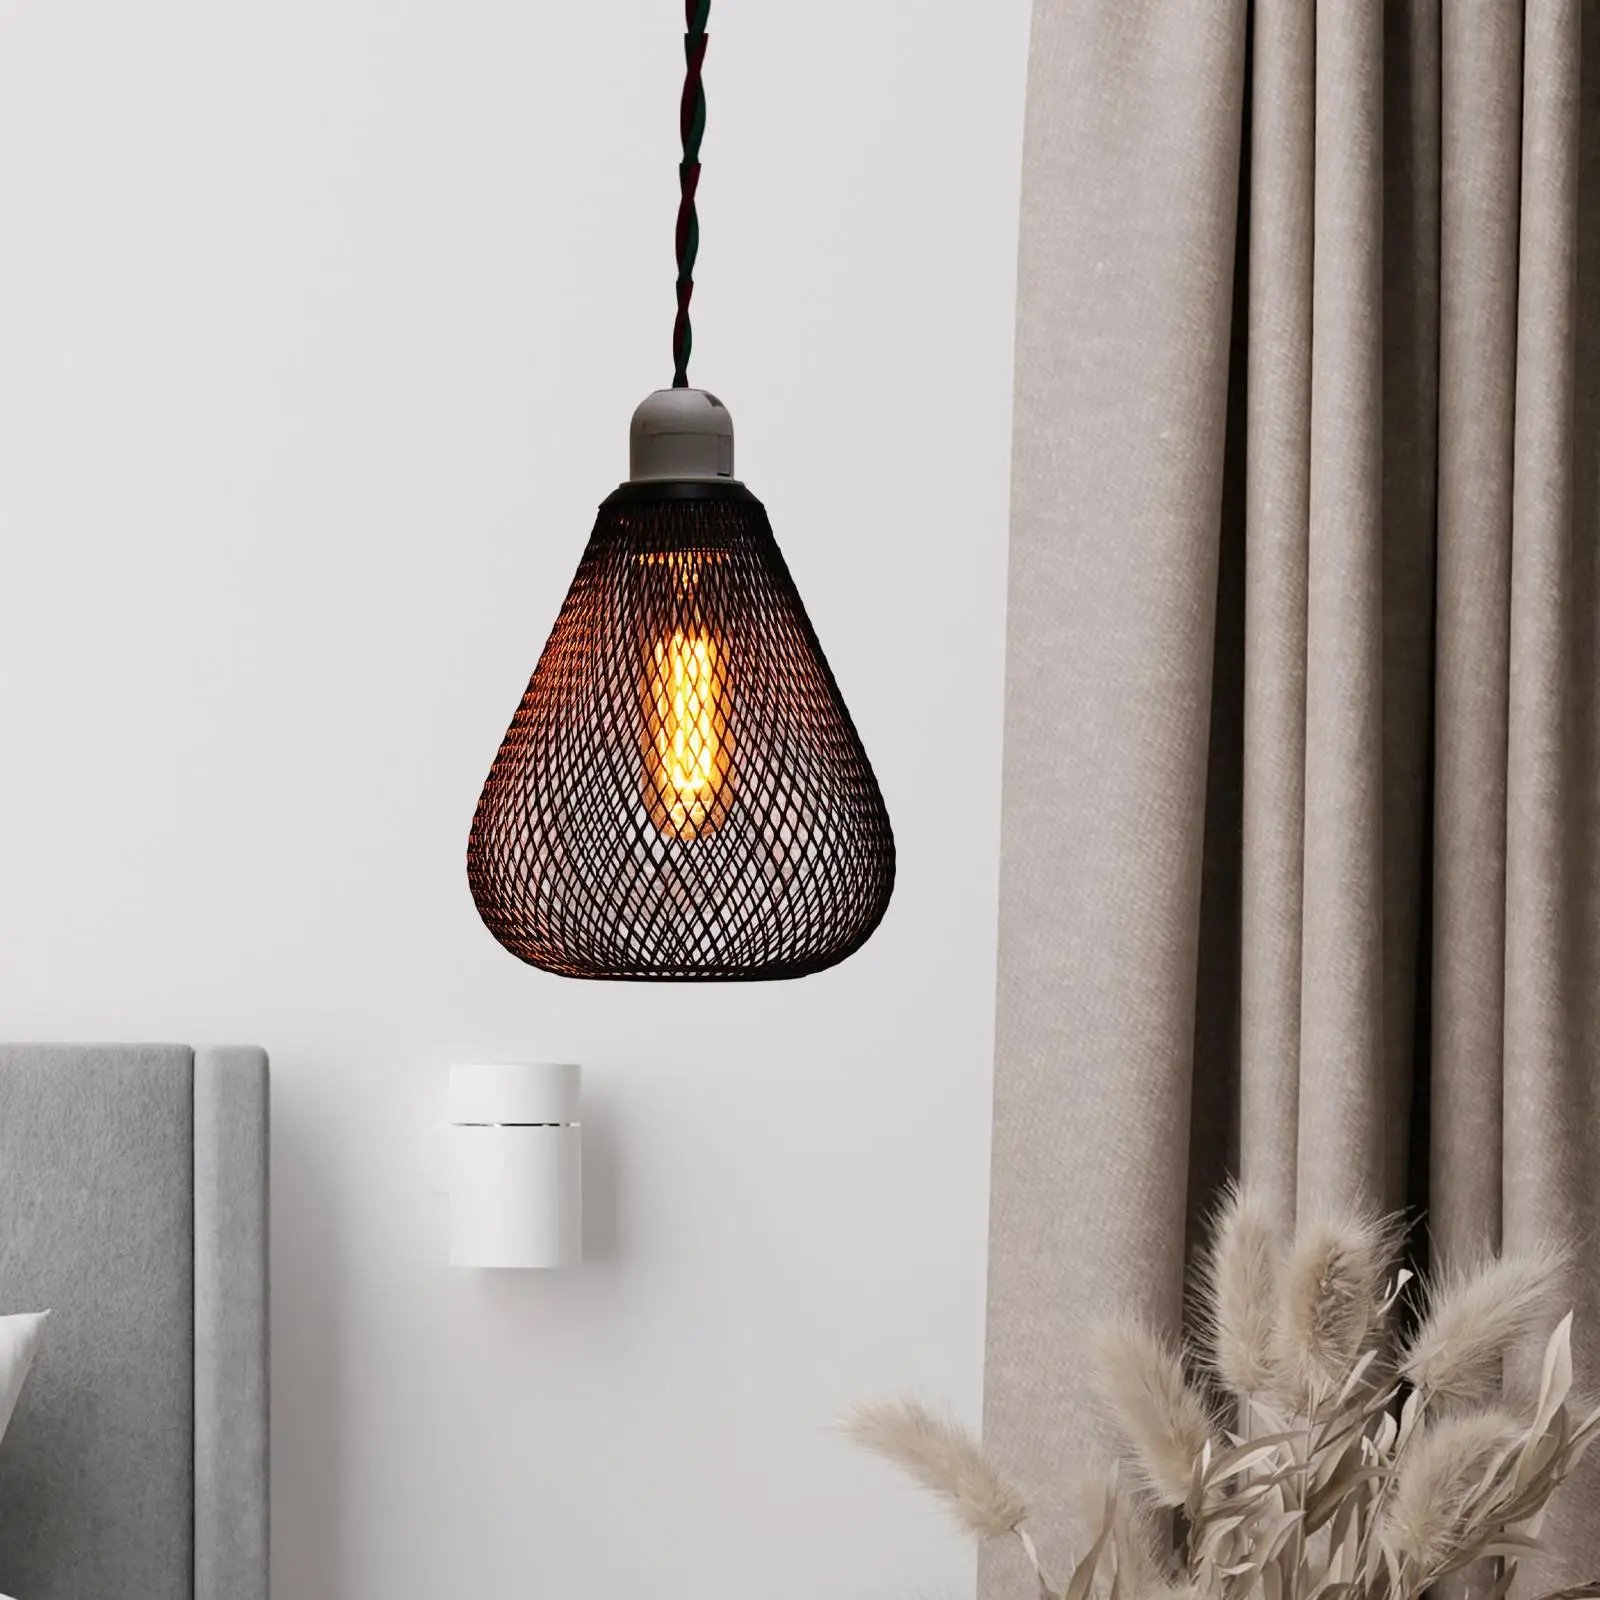 Iron Wire Lampshade Retro Style Ceiling Pendant Light Shade Hollow Lampshade for